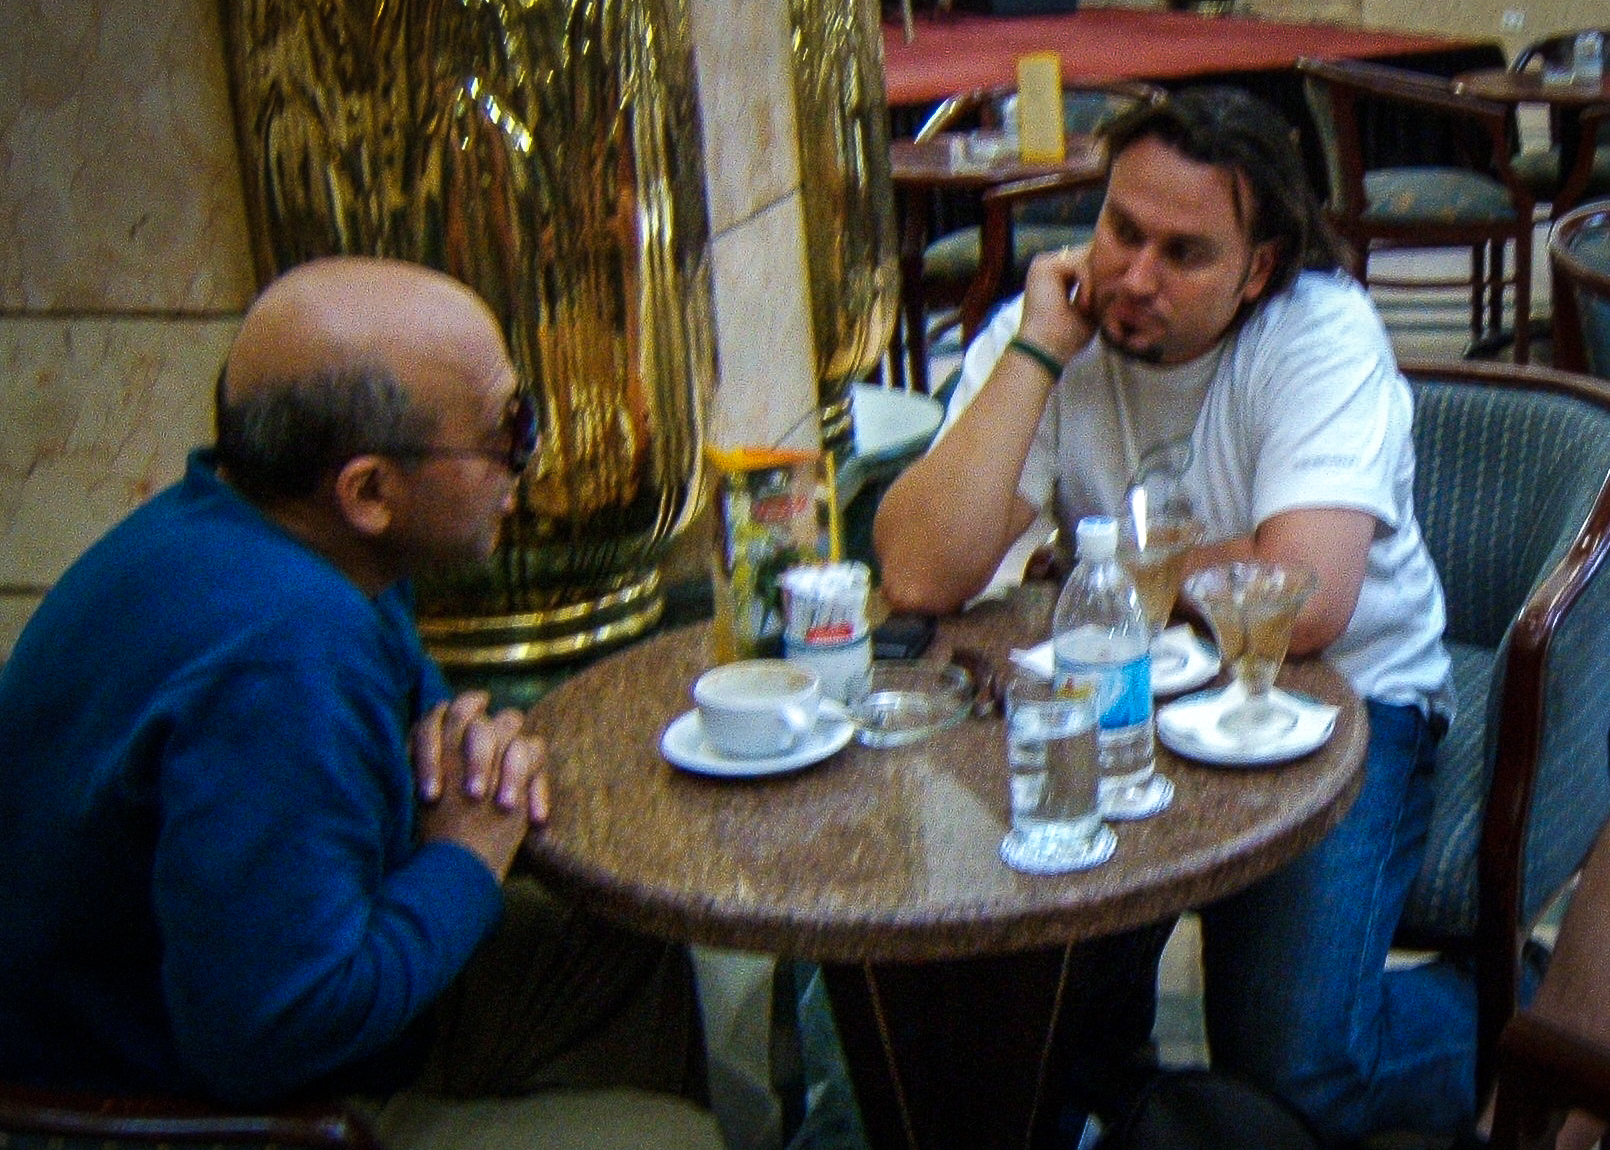 Meeting with legendary Egyptian film director Samir Seif in Cairo.